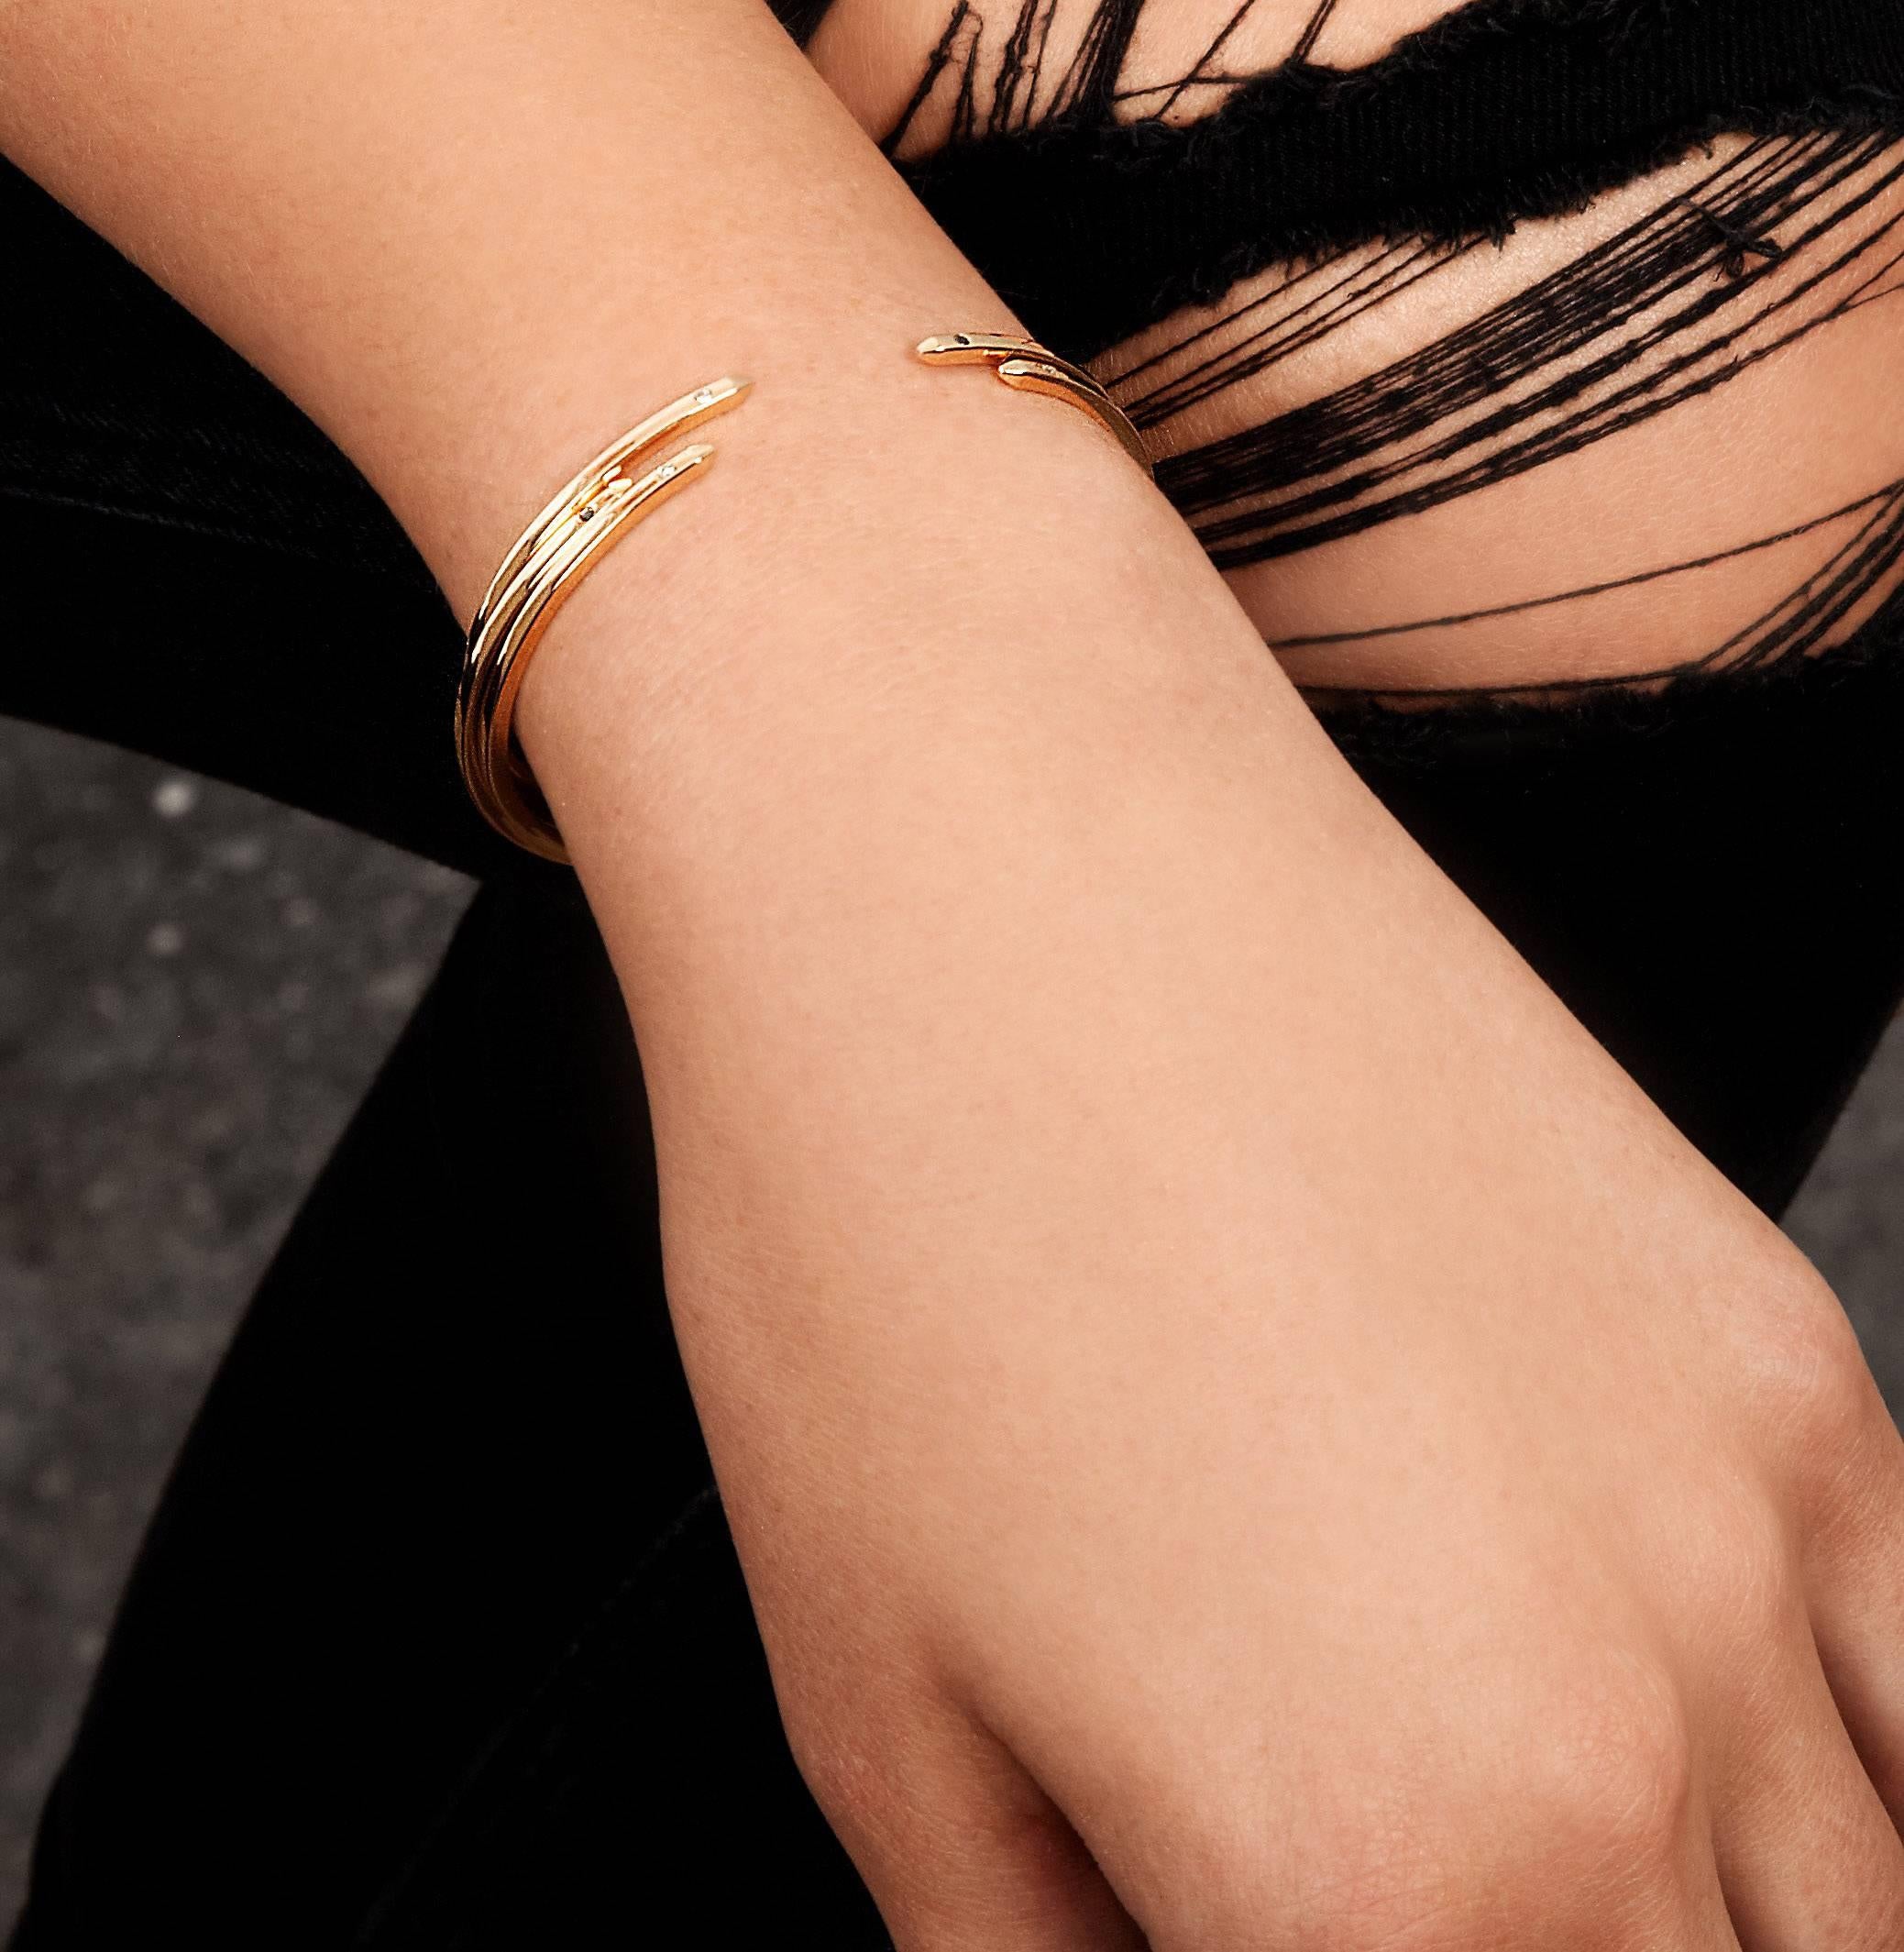 An elevated take on a jewellery basic, our 2mm-square cuff in 9-carat yellow gold has square beveled edges and two white diamonds.  Total diamond carat weight .016 carats.  The bracelet is slightly flexible to enable a customised fit for the wearer.